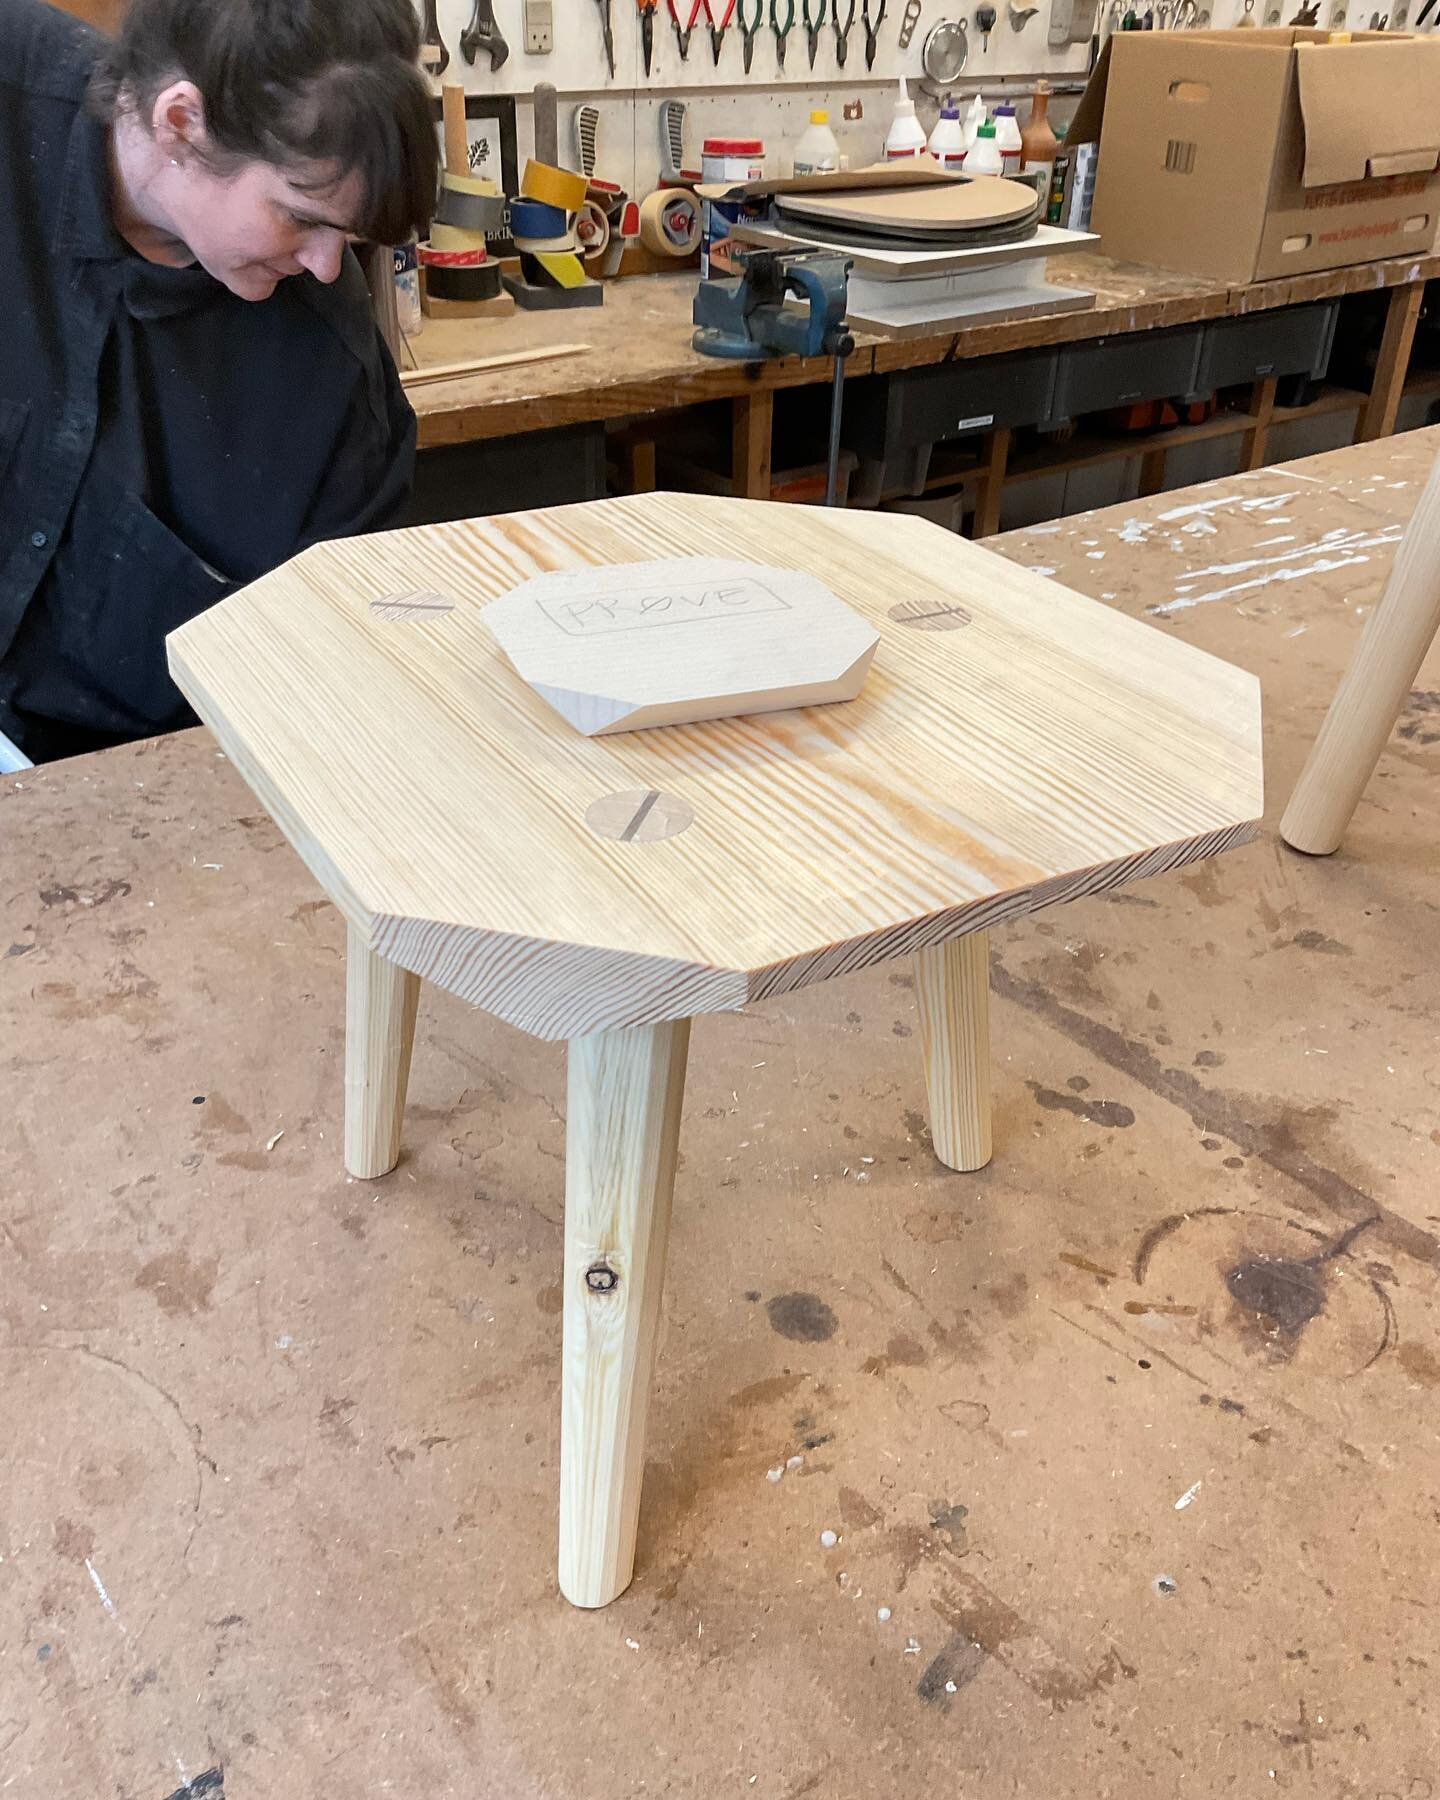 Just finished a two day #woodworking course by the amazing @andreastokholm. We made our own stool using only Japanese hand tools = 95% planing with a #kanna. 

So inspiring being able to spend two days next to such a skilled cabinet maker and generou